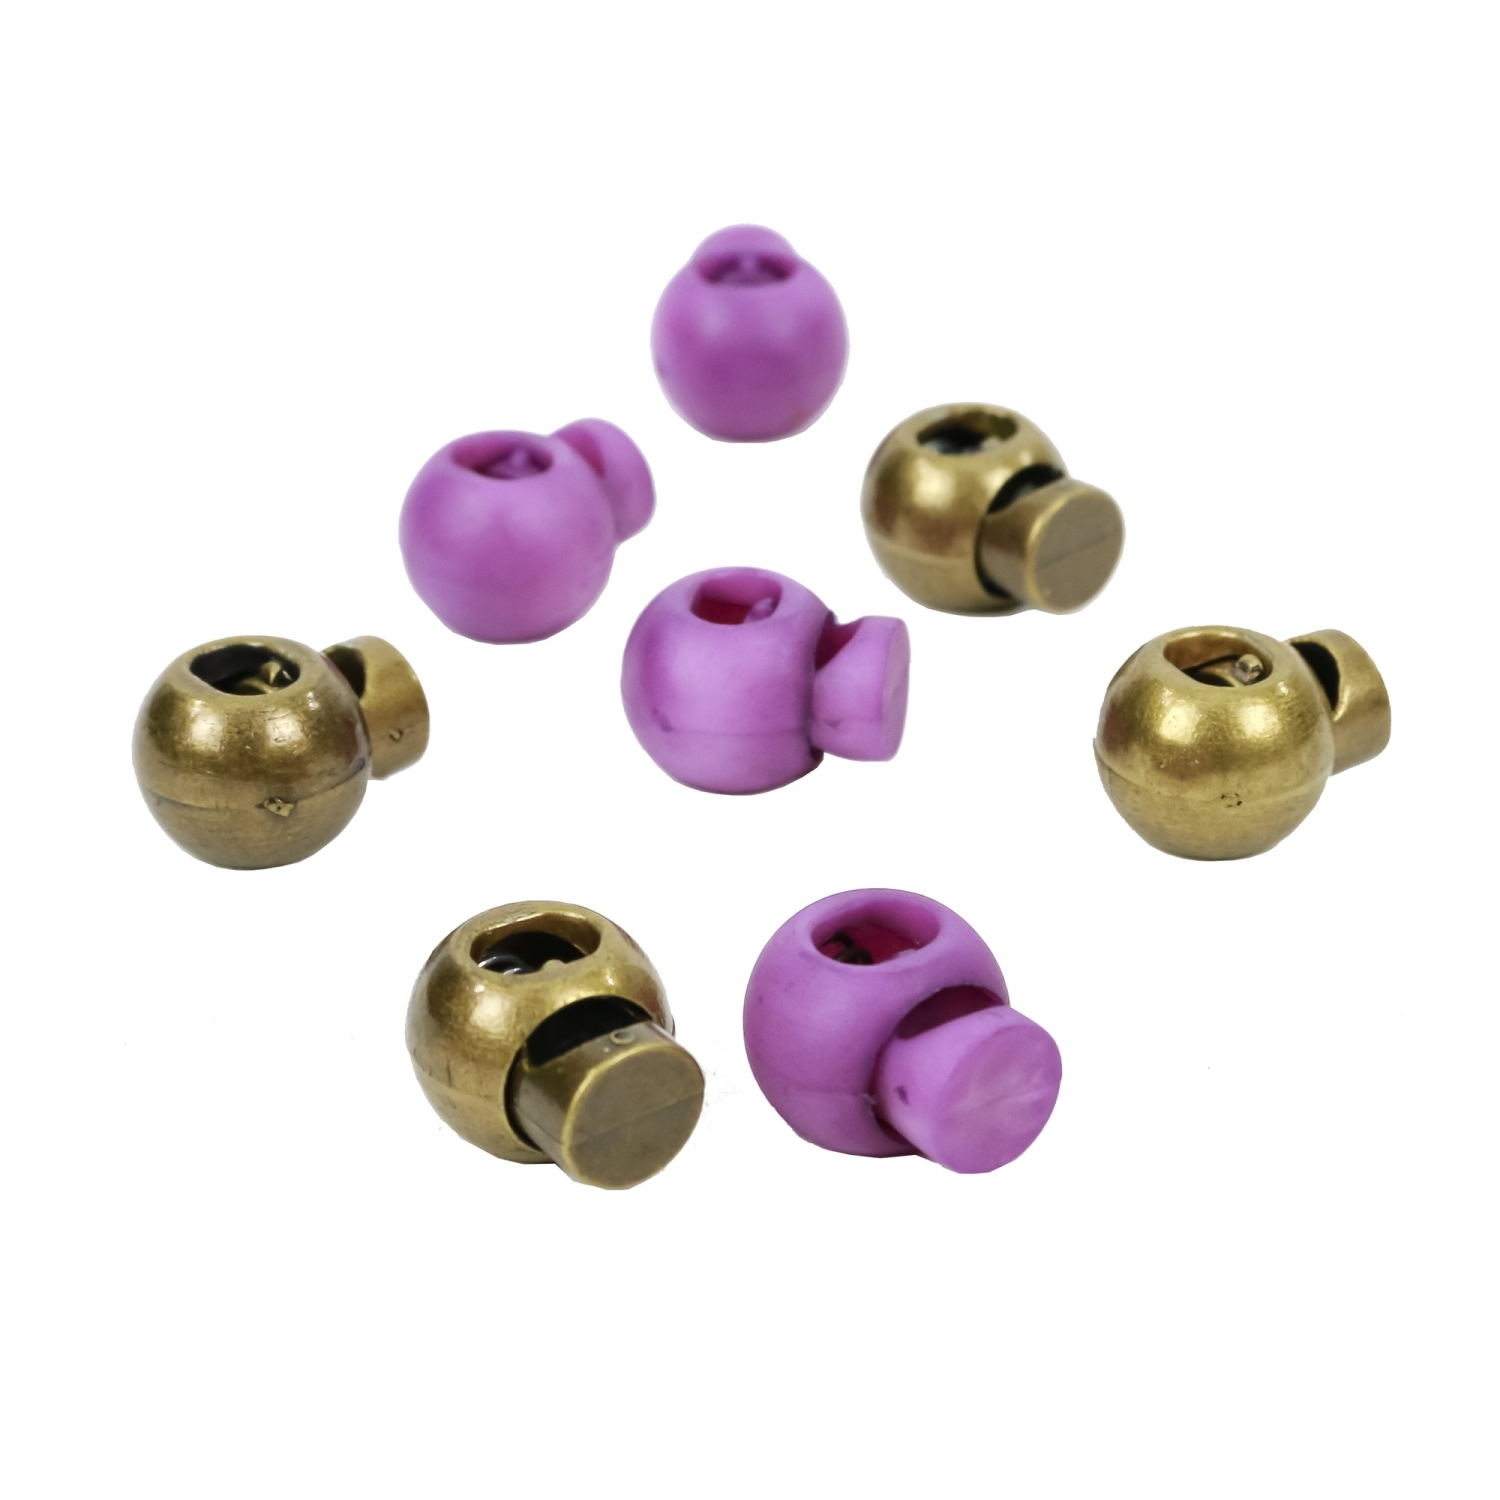 Stoppers (200 pcs/bag) Code: 0305-3129-BRASS